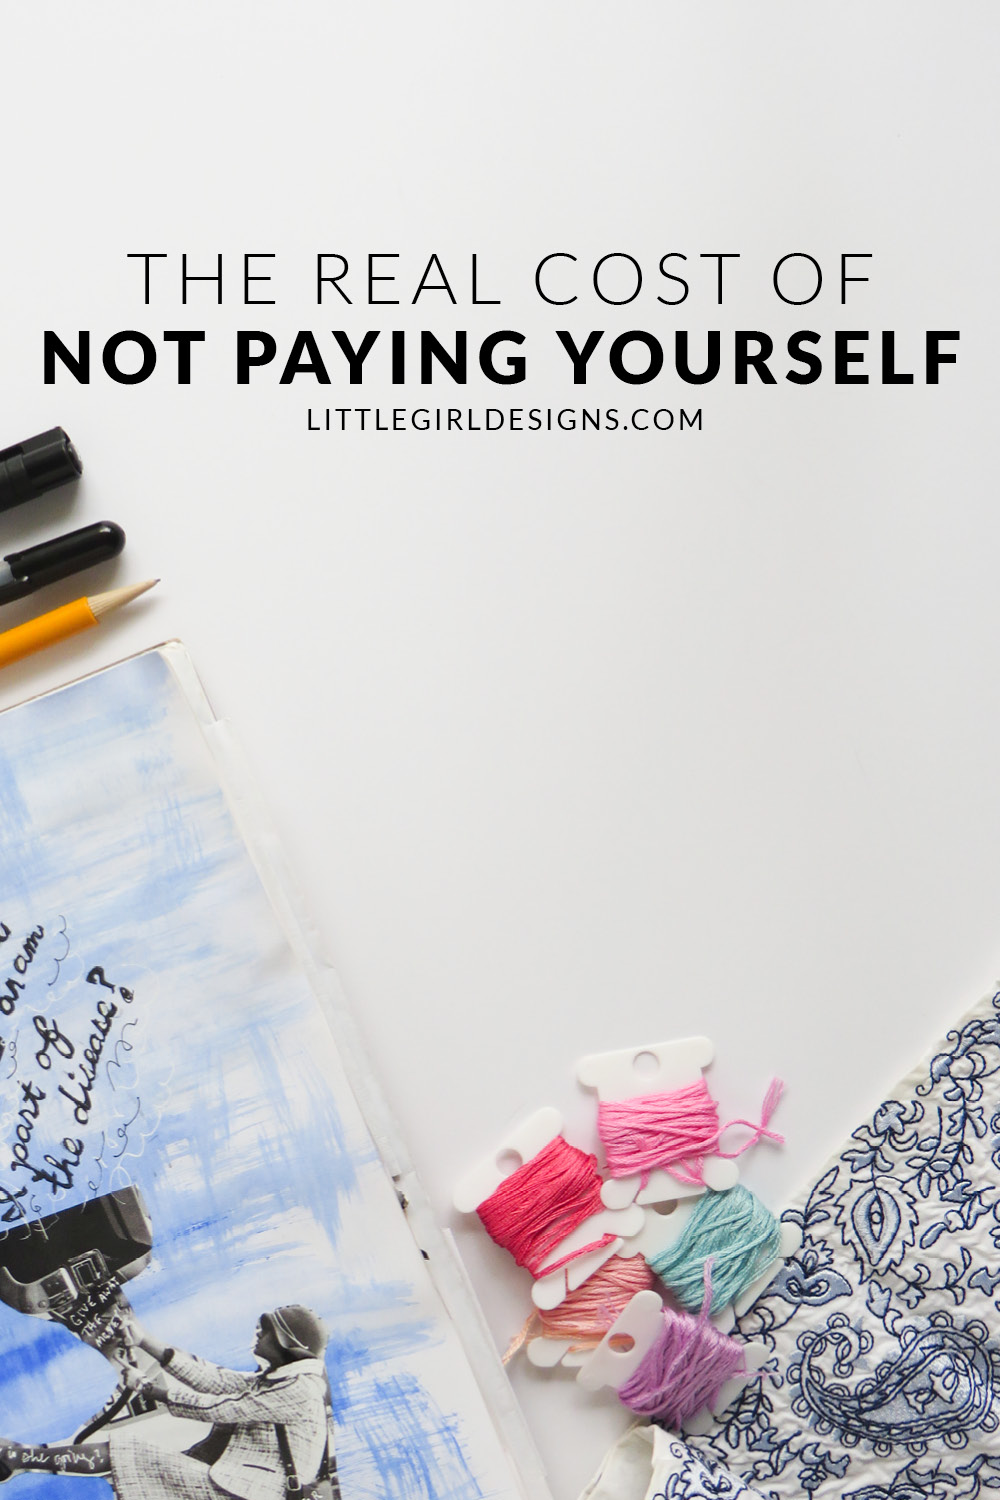 The Real Cost of NOT Paying Yourself